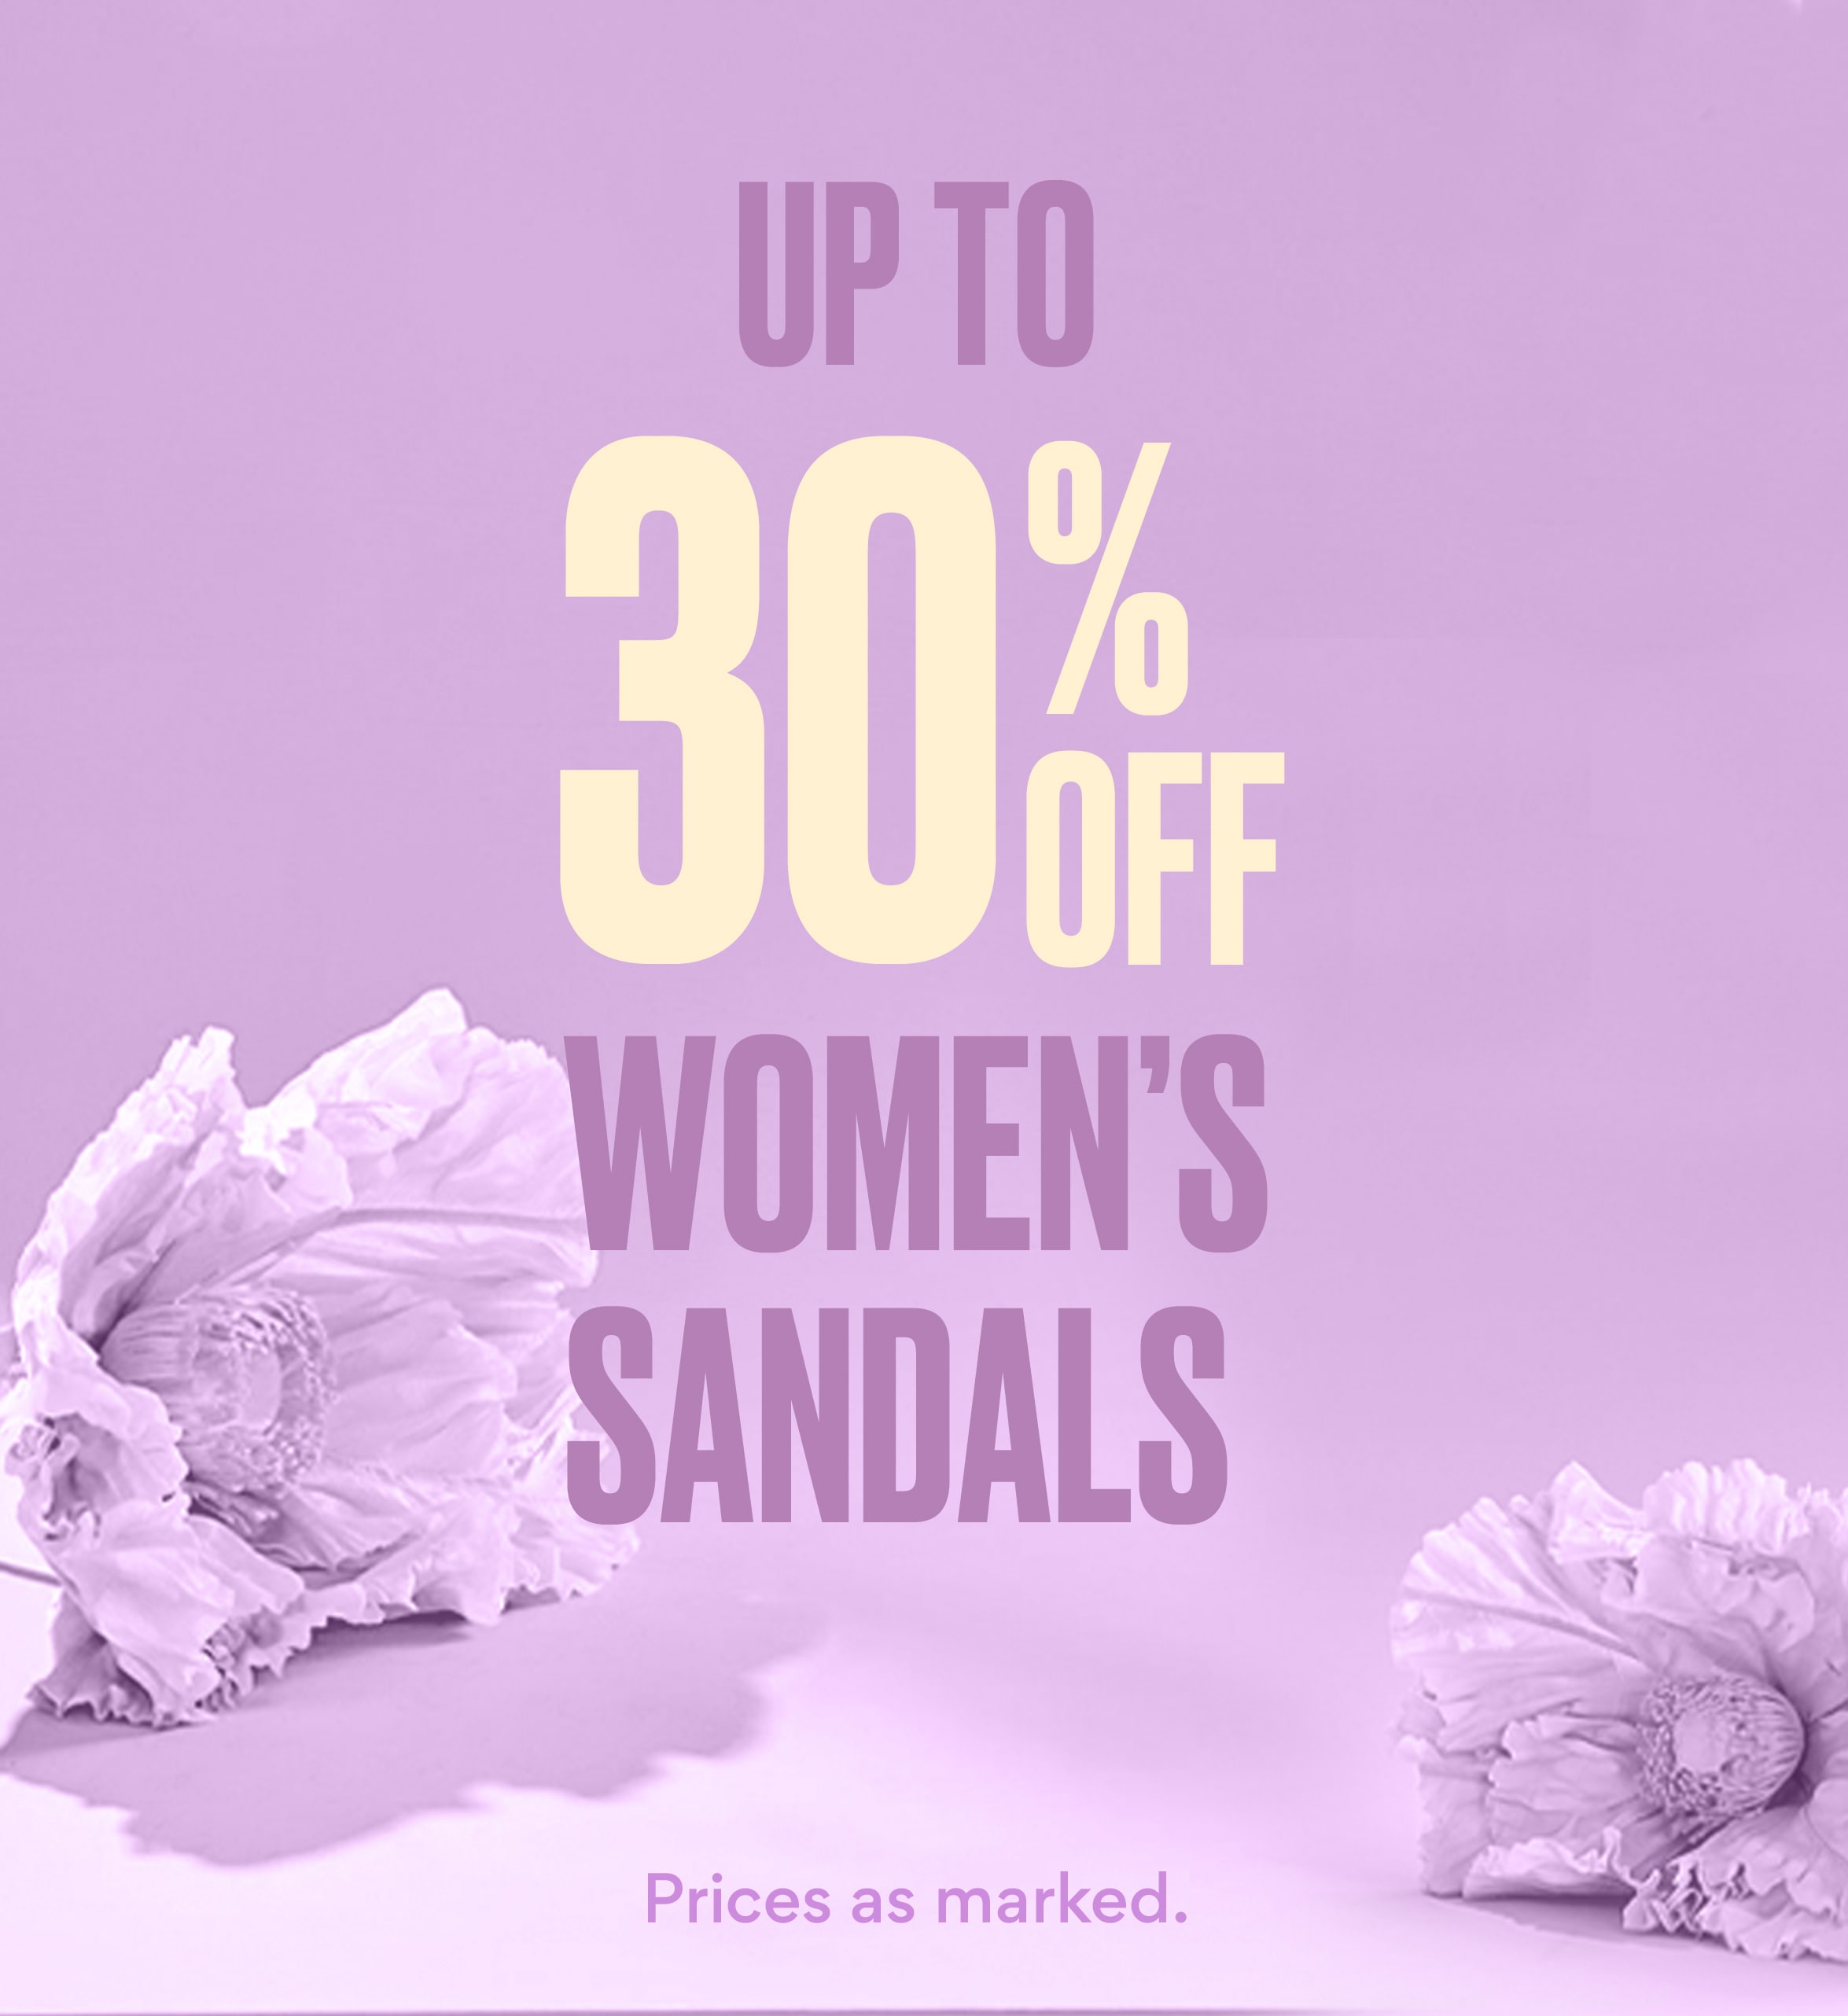 up to 30% off women's sandals